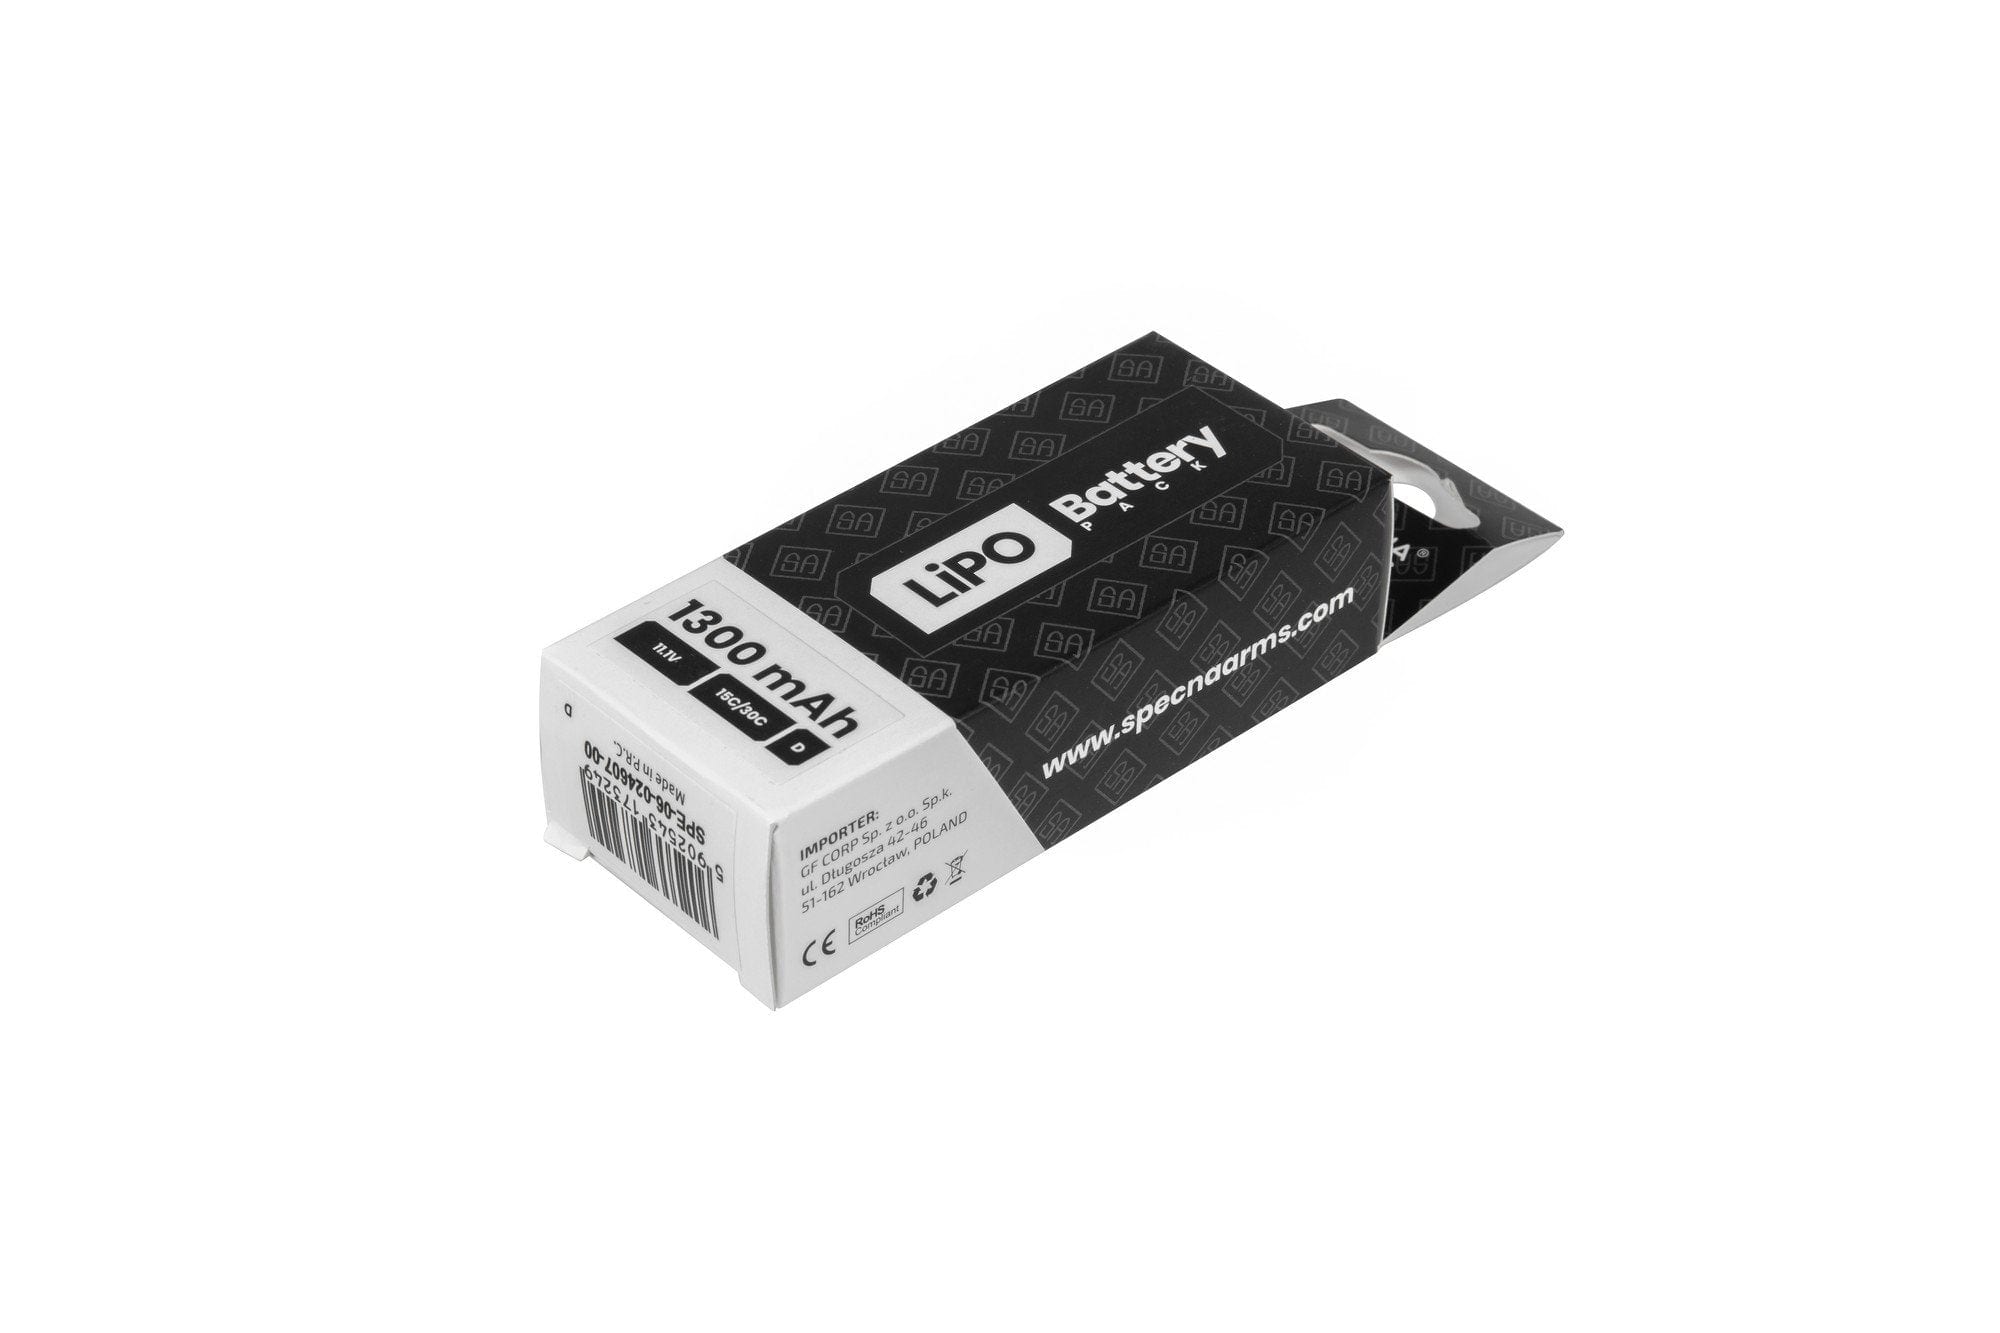 LiPo 11,1V 1300mAh 15 / 30C Battery - T-Connect (Deans) by Specna Arms on Airsoft Mania Europe